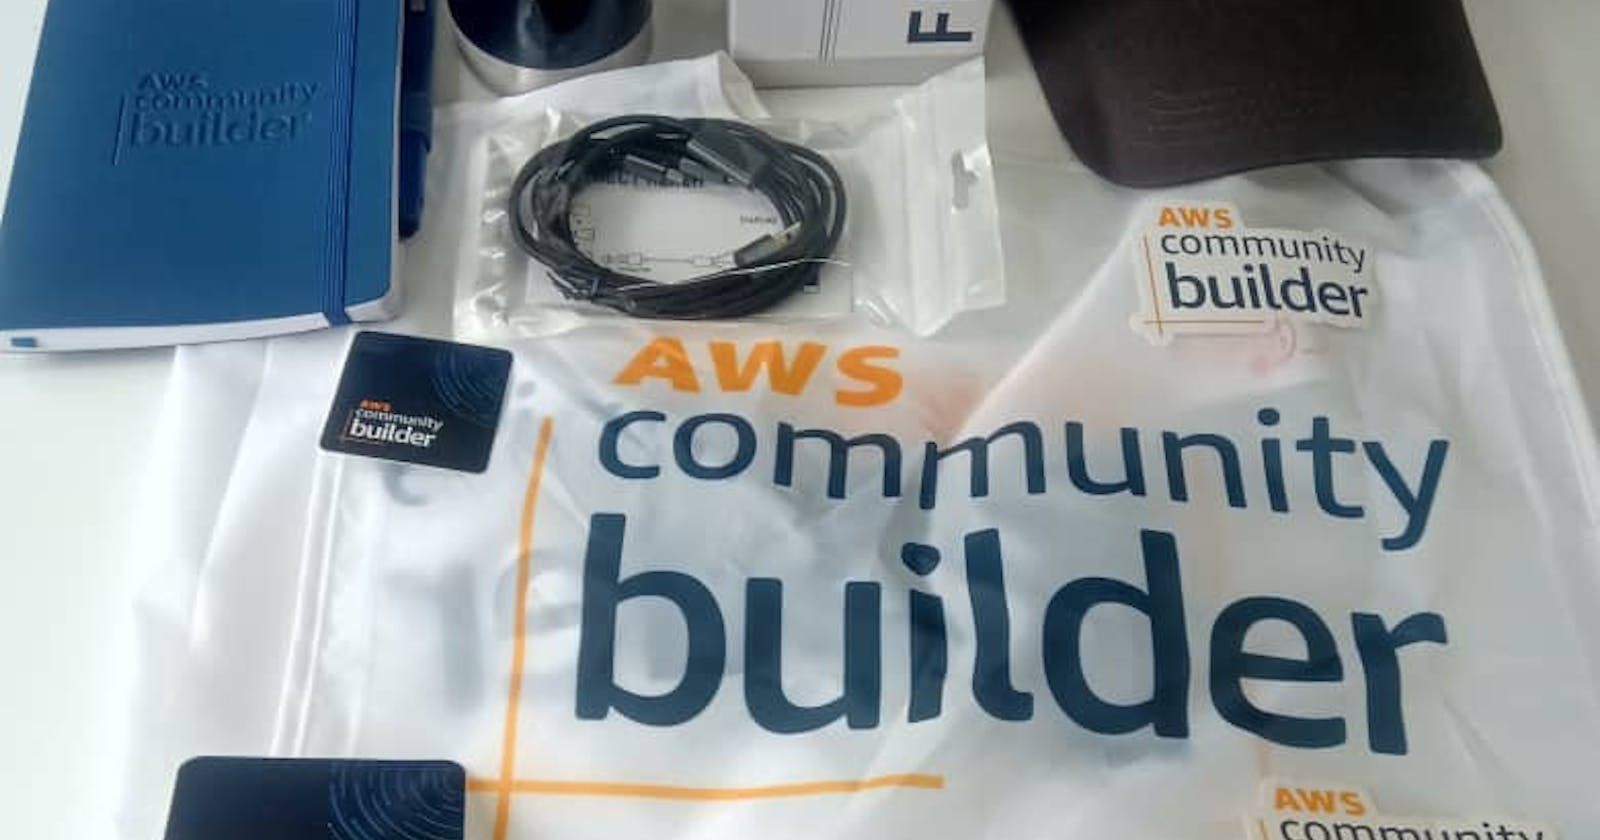 A cross session of AWS community builder program just ended, it was so insightful. A group of AWS minded builders and a Africa hero Rosius Ndimofor.